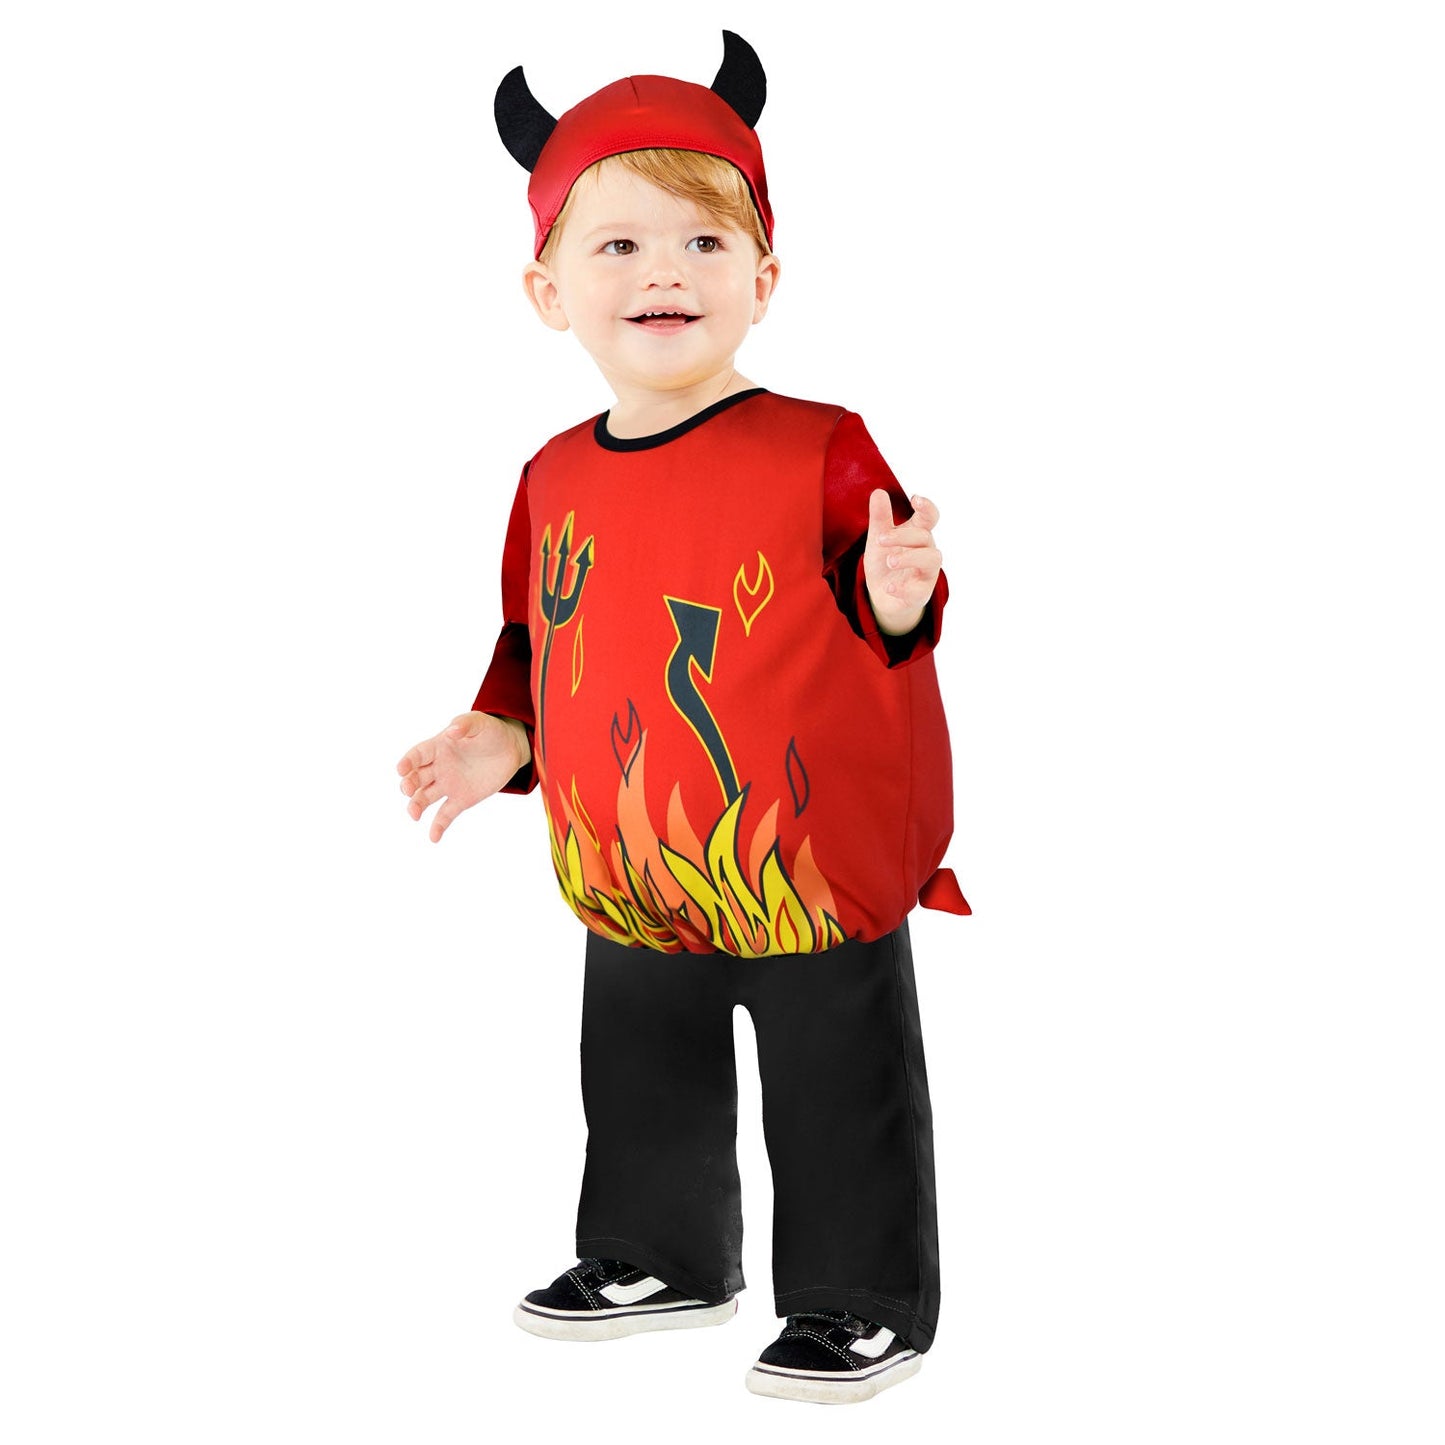 Baby Devil Costume includes top with tail and headpiece